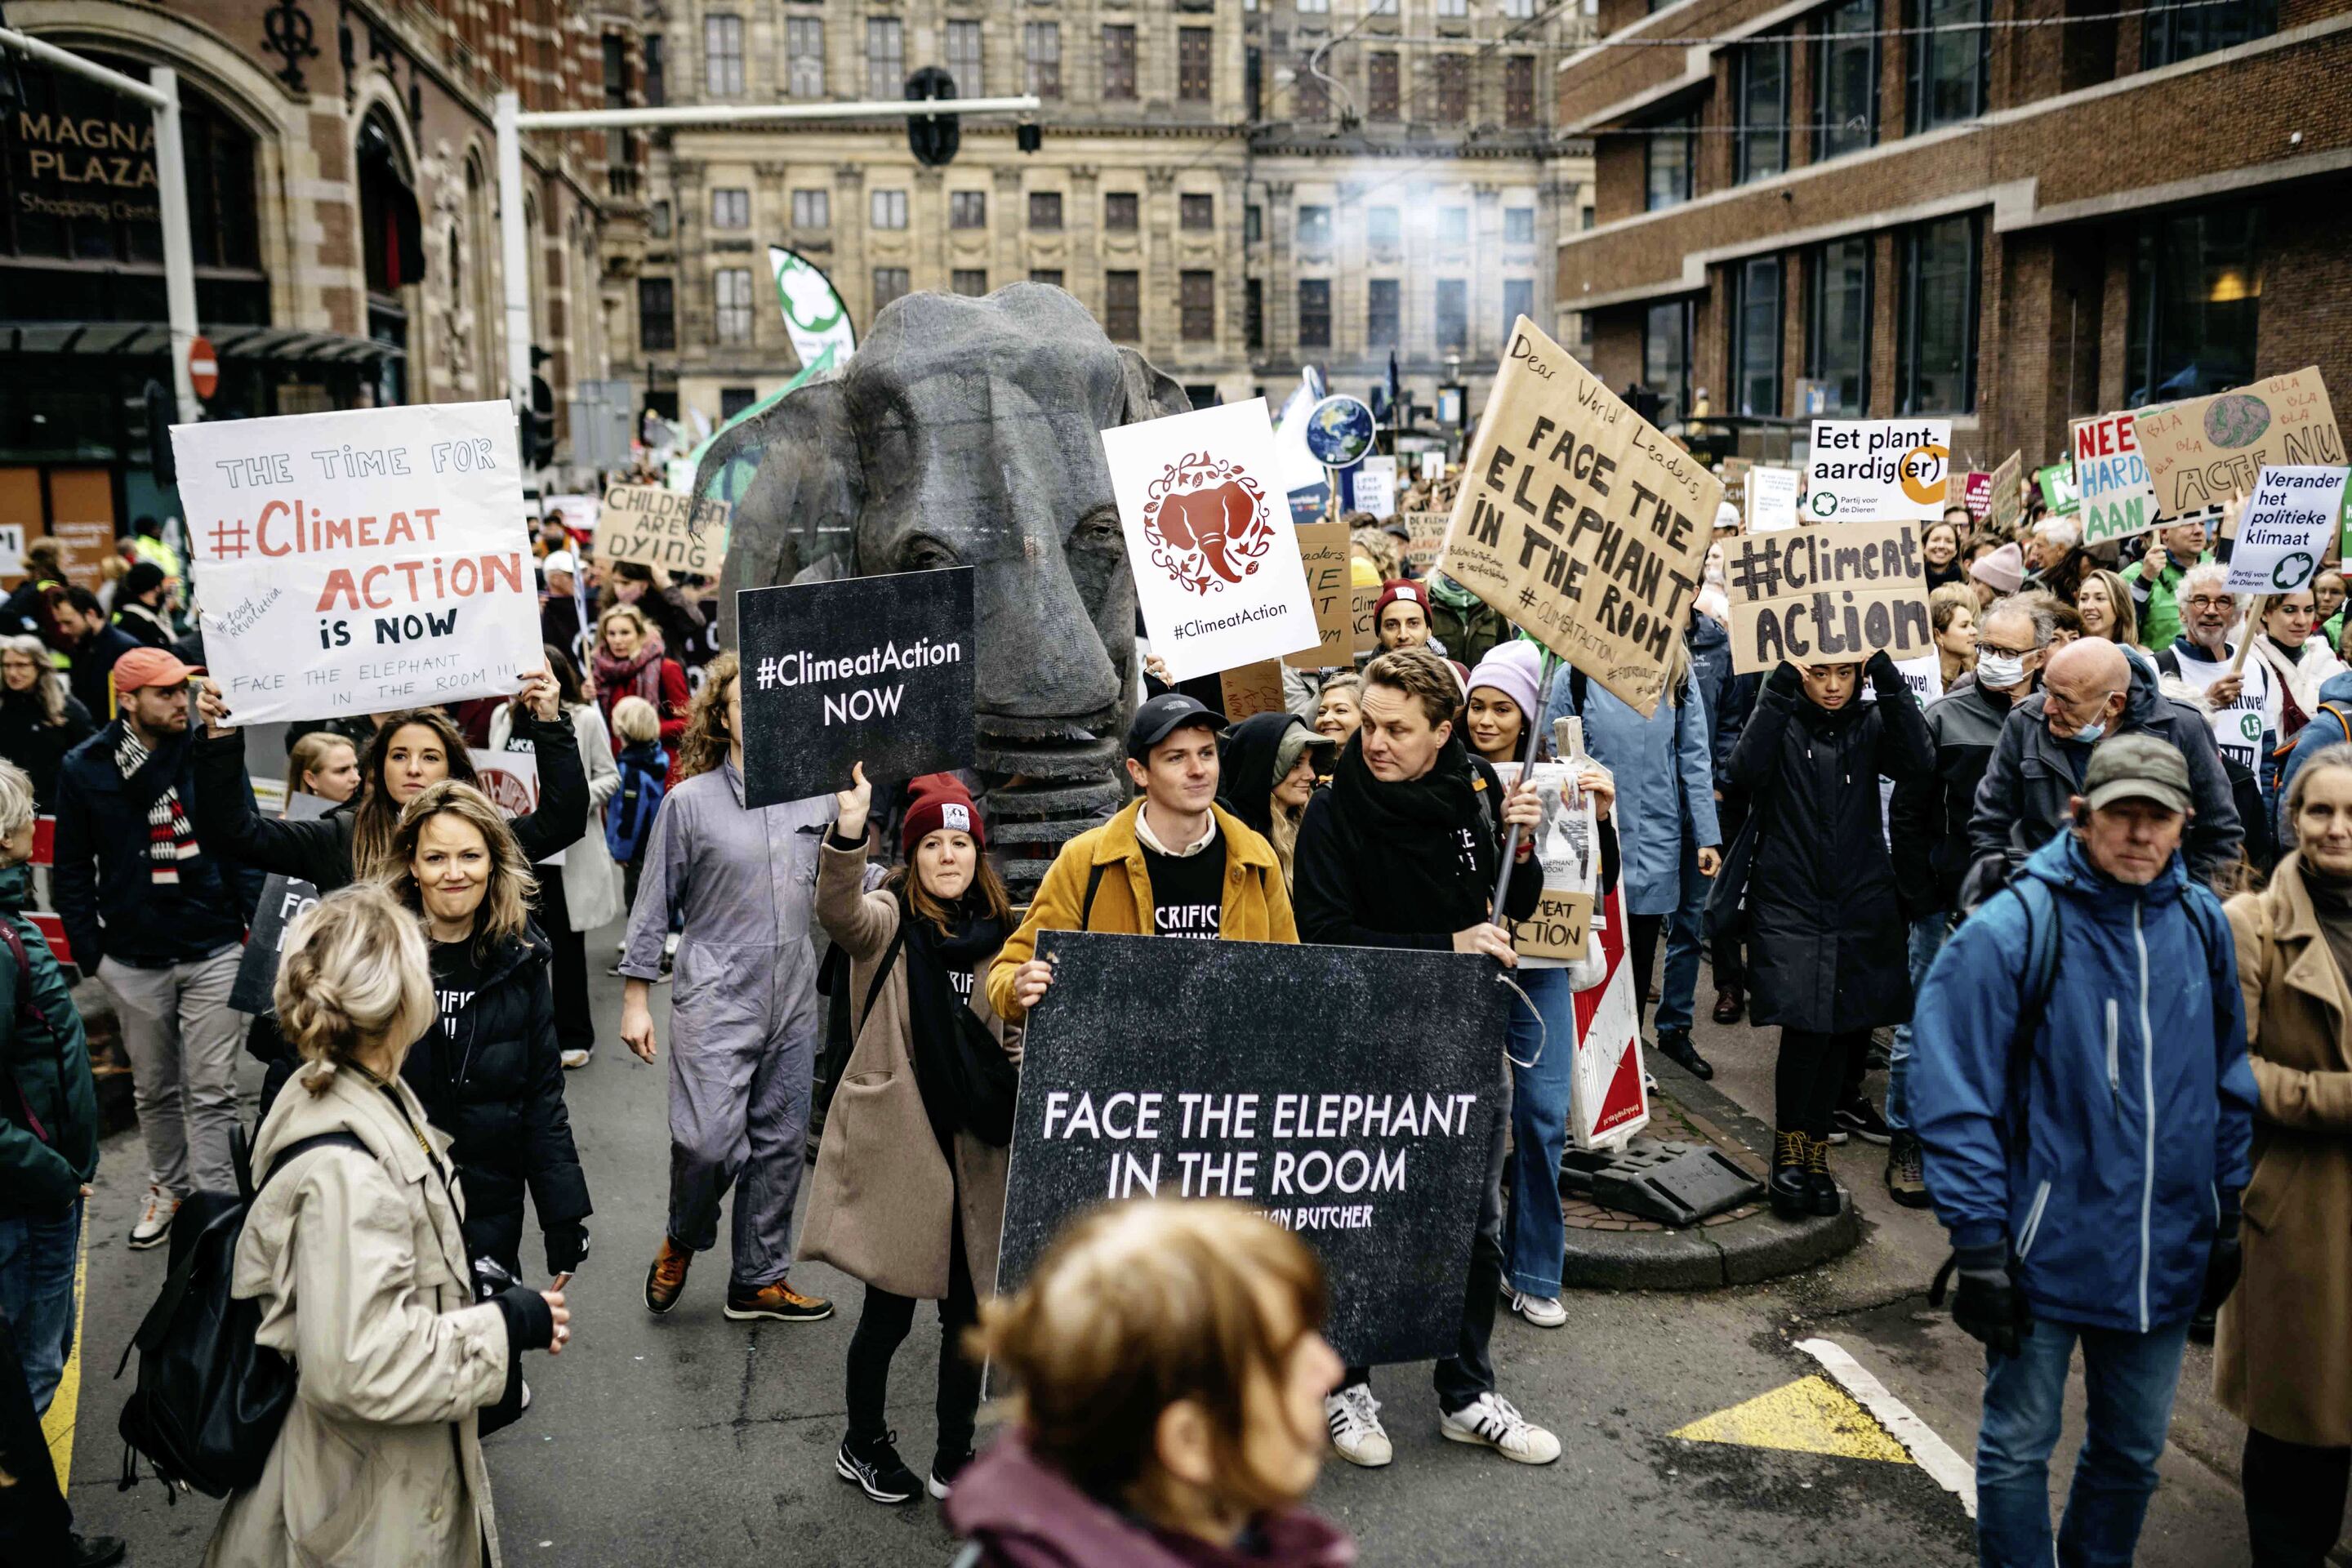 Crowd demonstrating against climate change